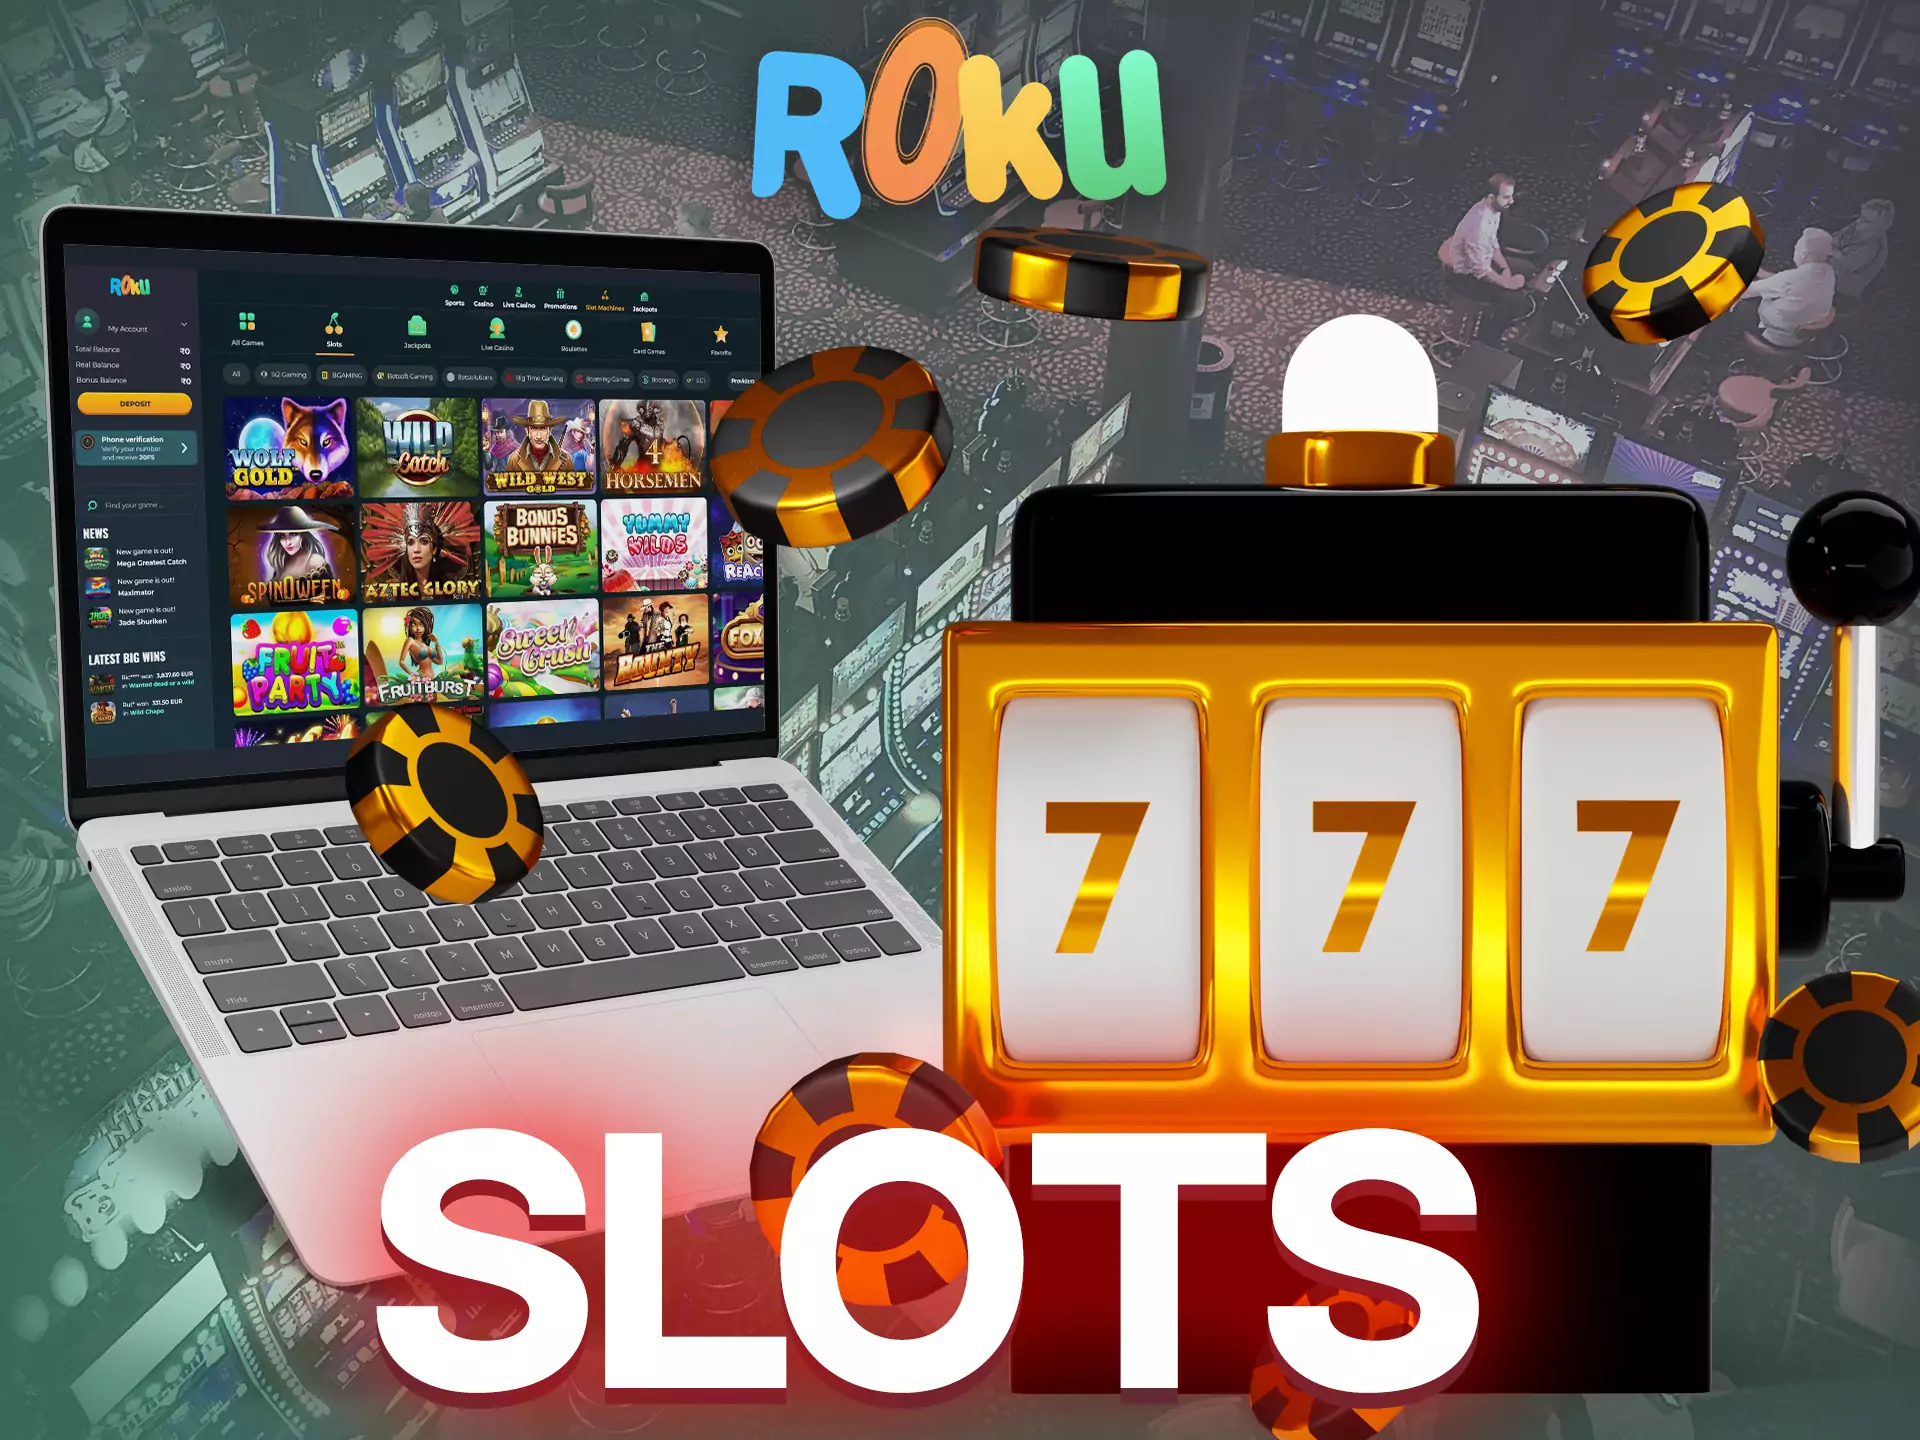 You don't need any special skills to play slot machines on Rokubet.